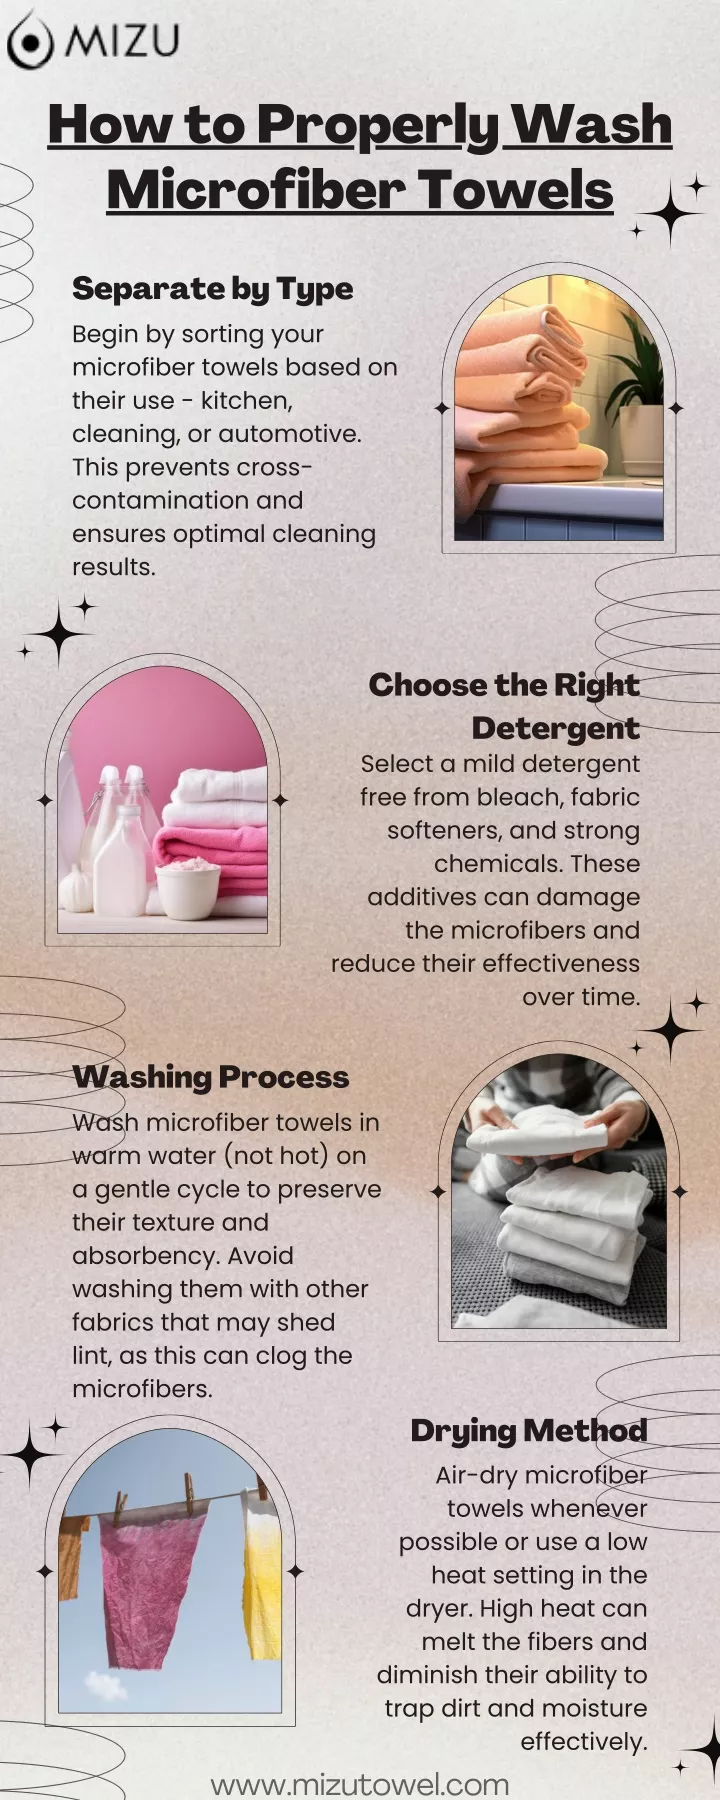 how to properly wash microfiber towels